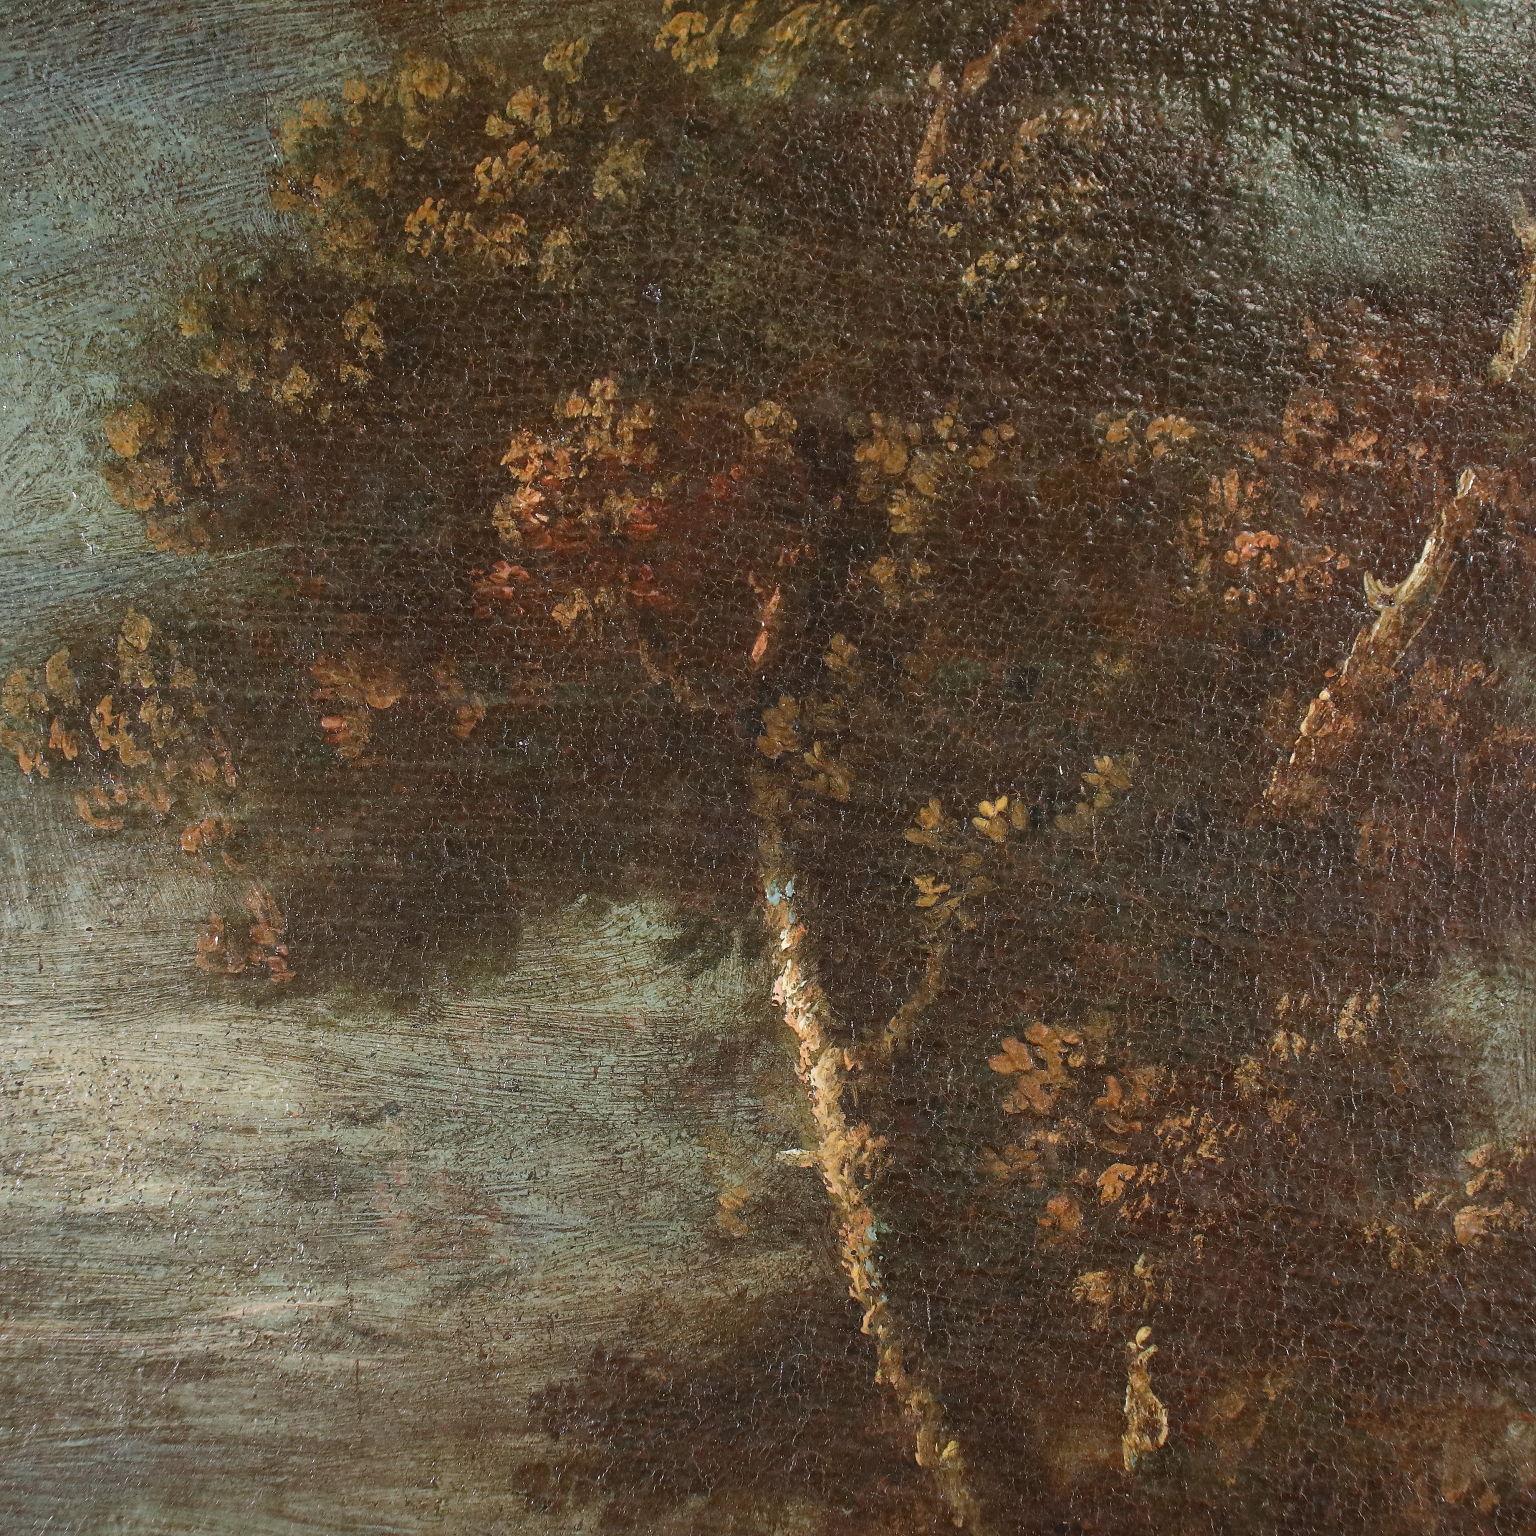 Landscape with Figures, oil on canvas, 1700s - Other Art Style Painting by Unknown